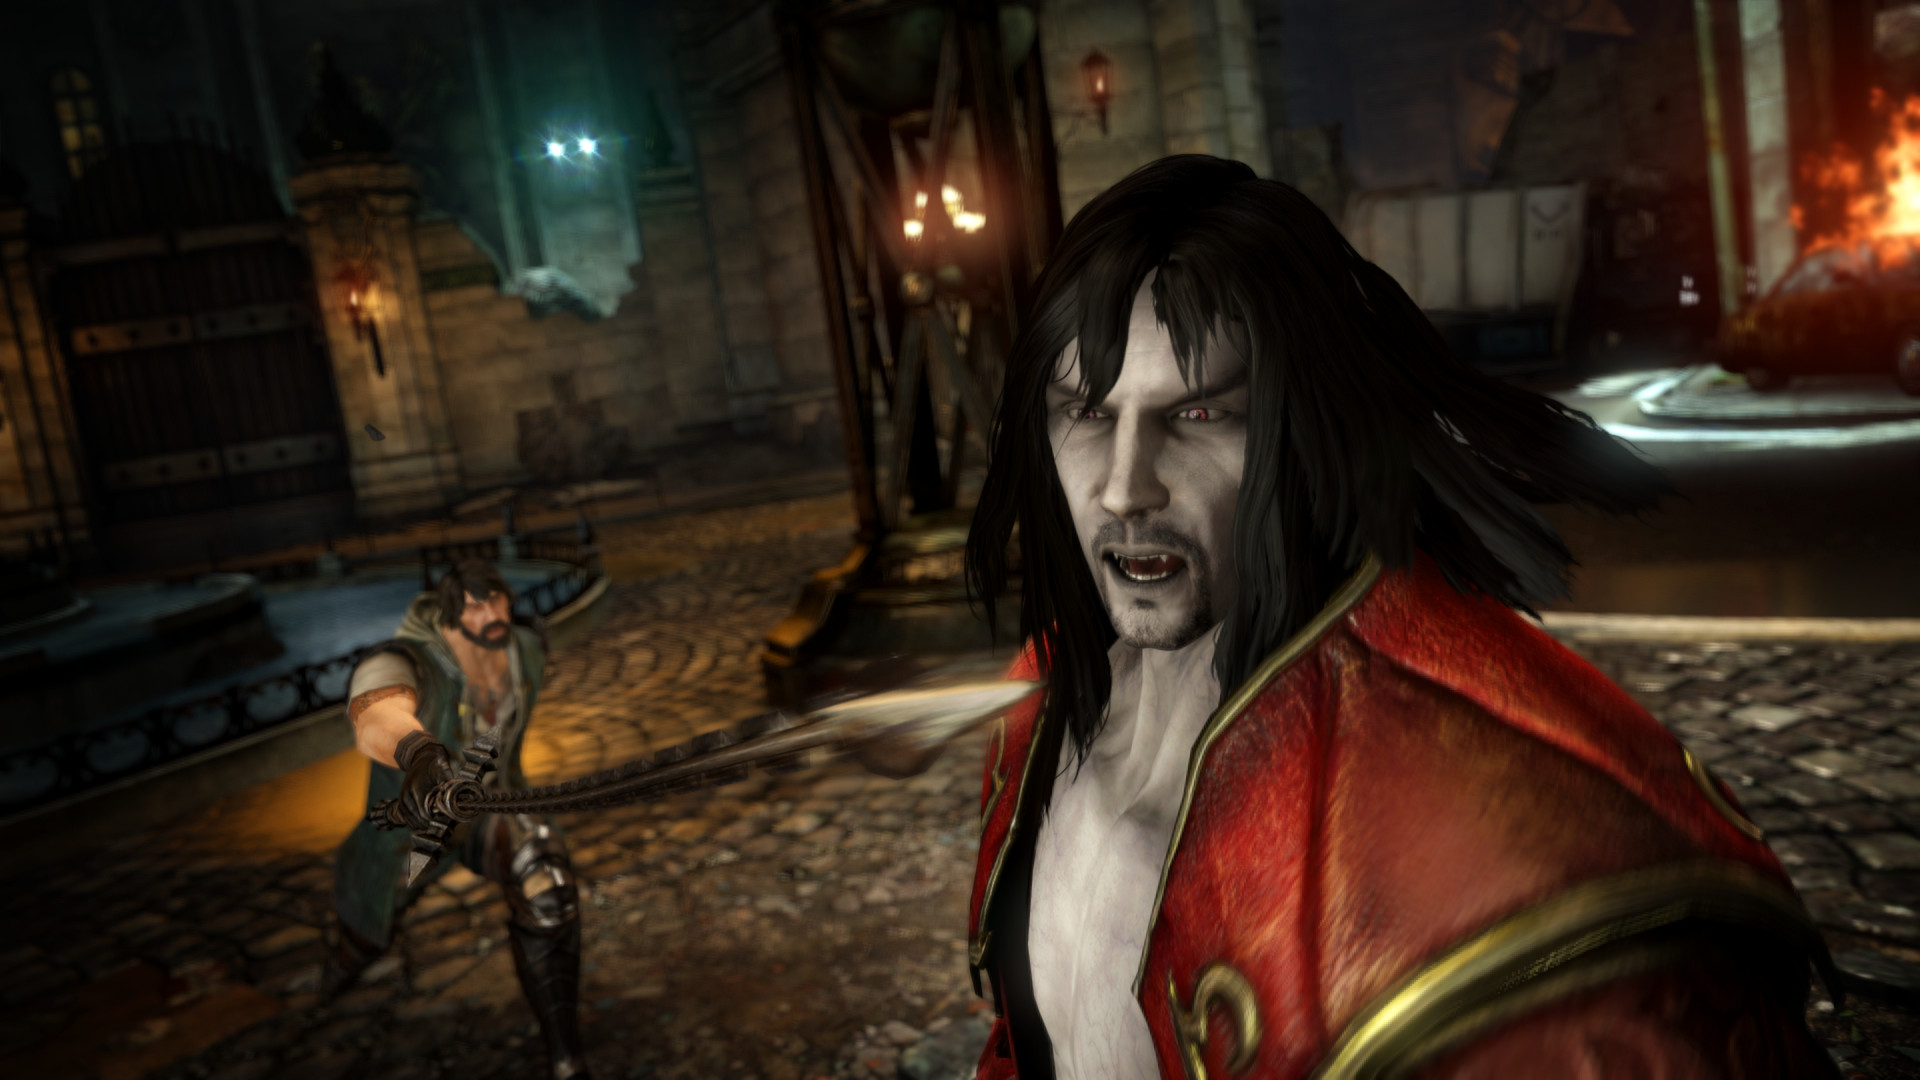 Castlevania: Lords of Shadow 2 on Steam